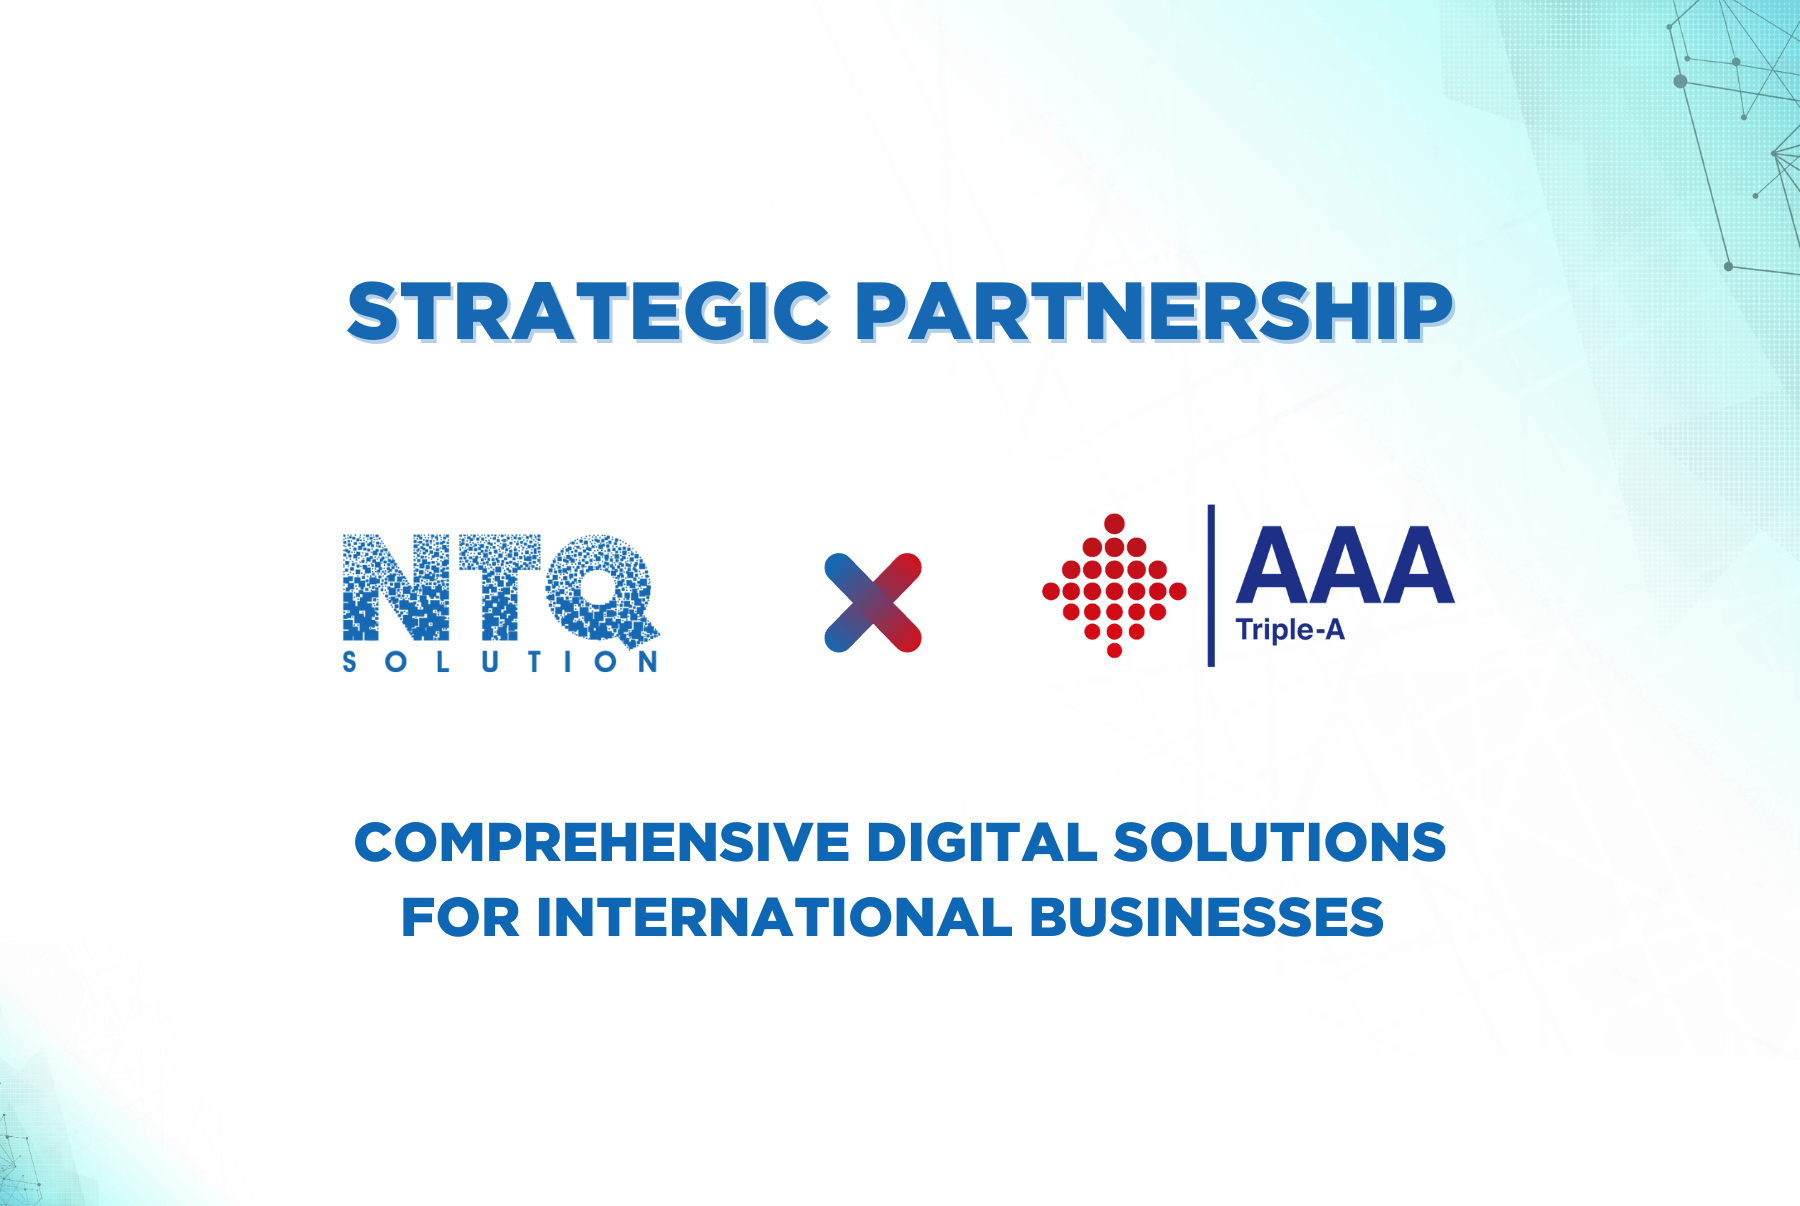 NTQ Solution To Become Strategic Partner With AAA Intelligent Solution To Deliver Digital Solutions For Clients Worldwide!